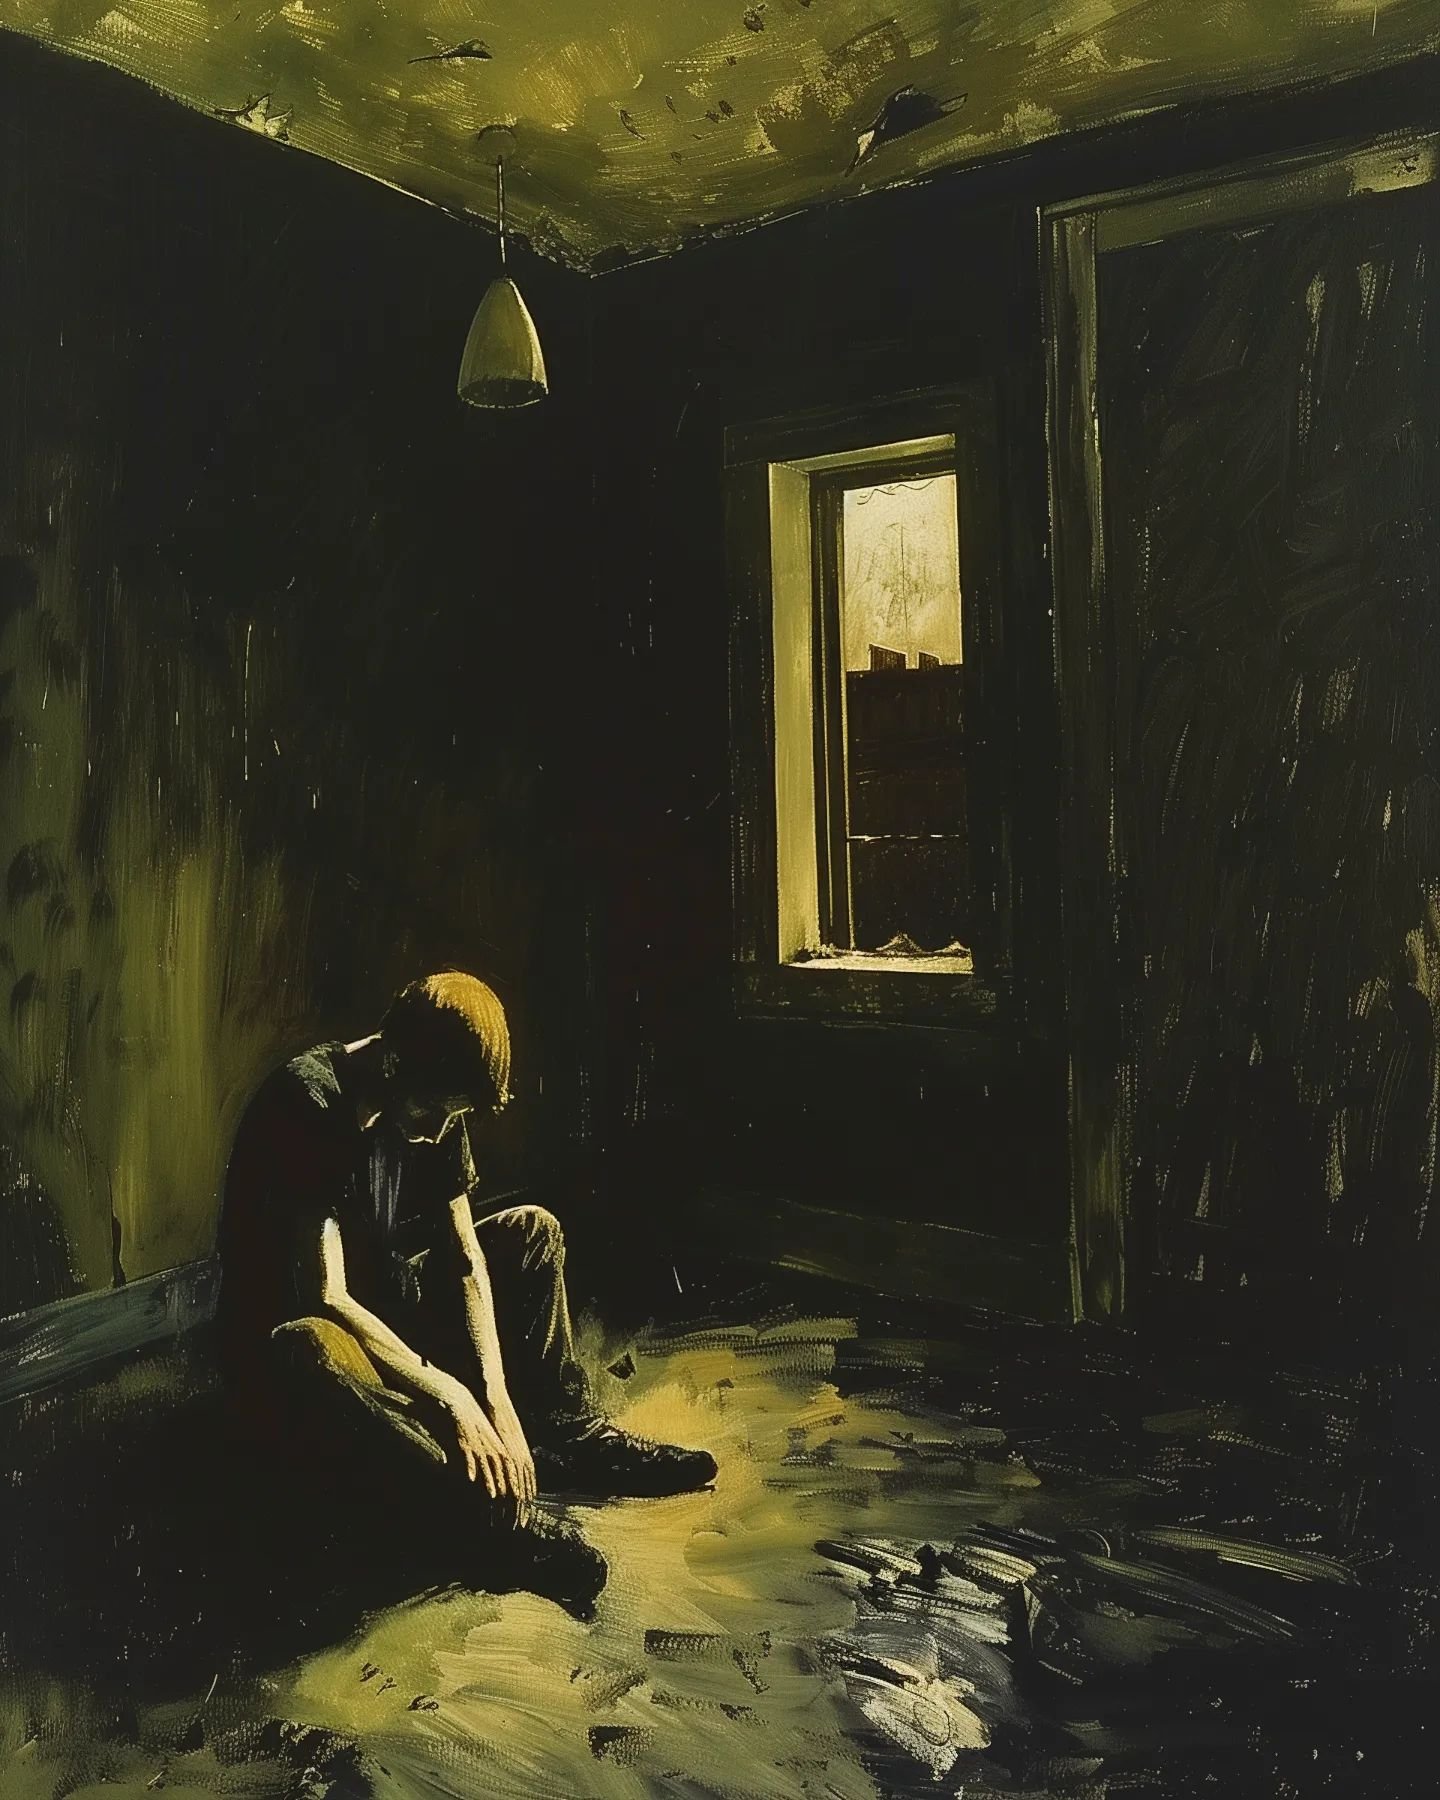 Desolation. 

Inspired by the works of Edward Hopper.

#ai #aigeneratedart #aiart #midjourney #midjourneyart #midjourney #midjourneyai #horror #horrorart #macabre #macabreart #goodgrief